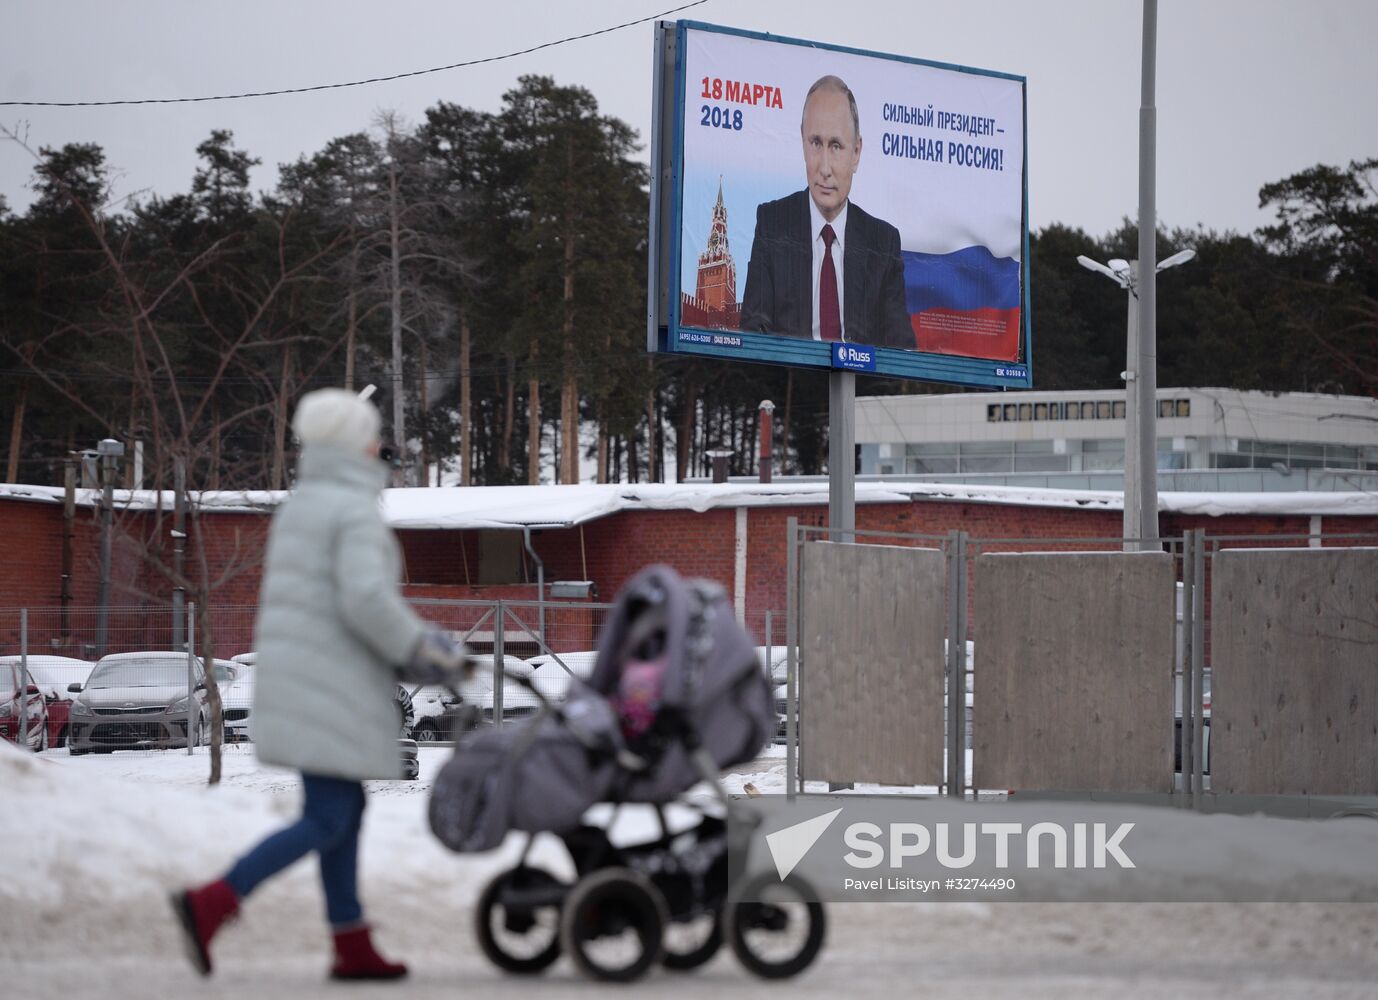 Campaign posters in support of incumbent Russian President Vladimir Putin